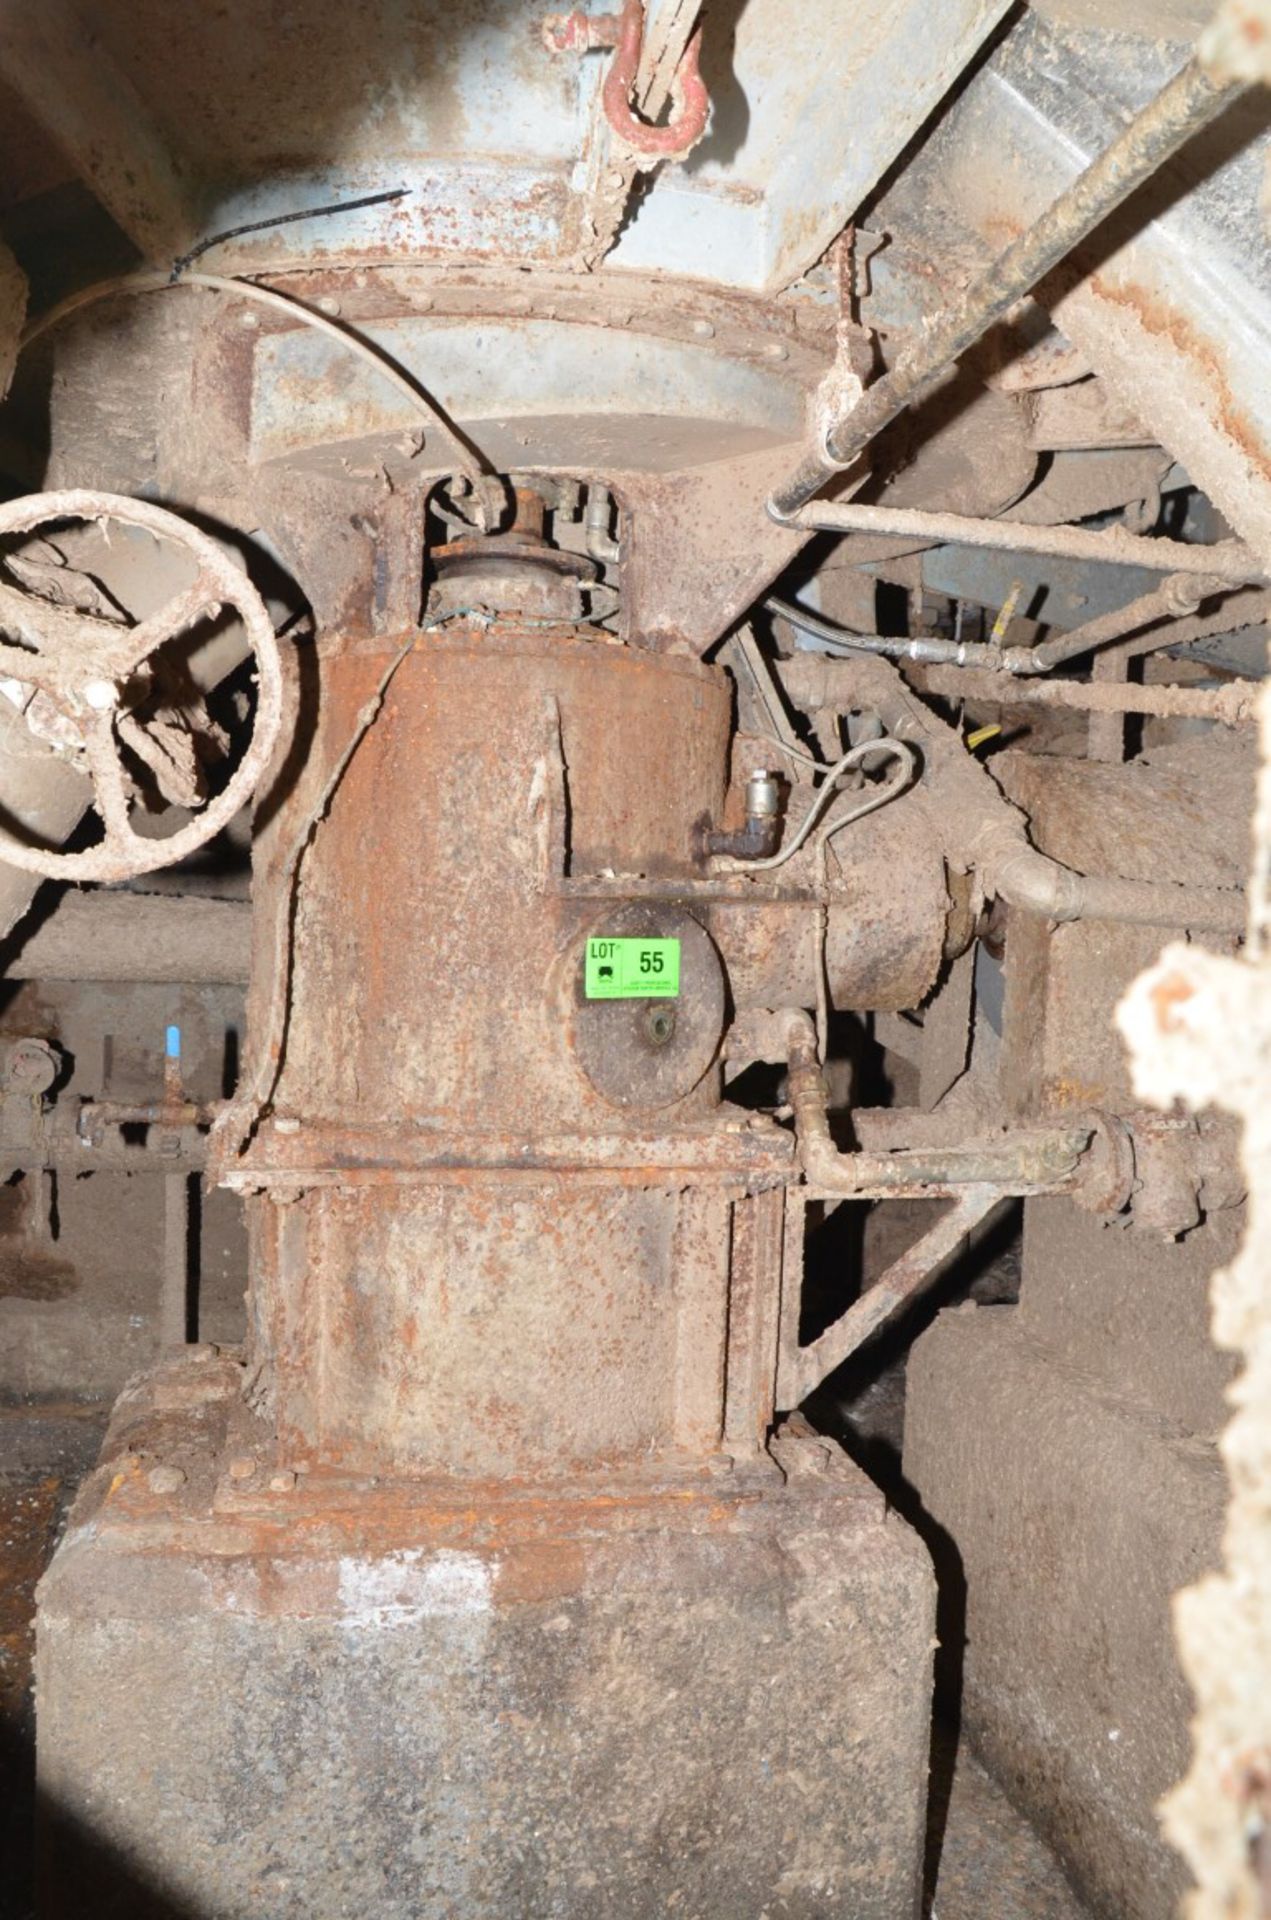 HYDRAPULPER GEARBOX, S/N N/A (CI) [RIGGING FEE FOR LOT #55 - $1250 USD PLUS APPLICABLE TAXES]